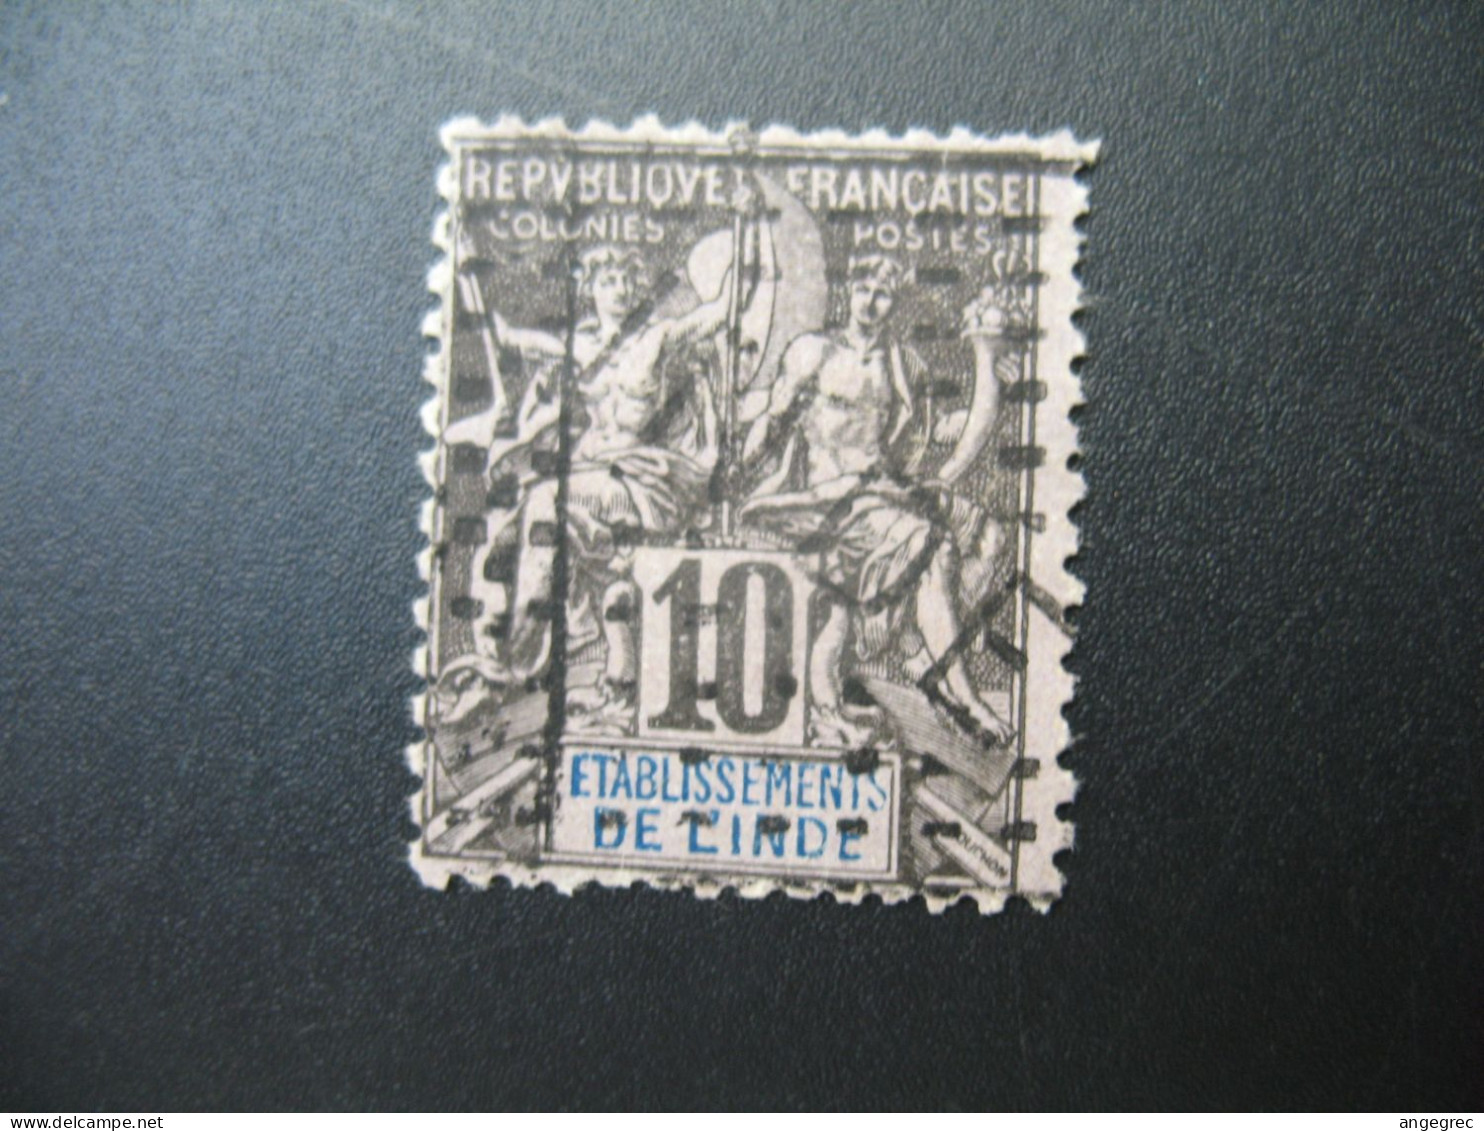 Inde Française Karikal Stamps French Colonies N° 5 Neuf * NSG Maury à Voir - Gebraucht